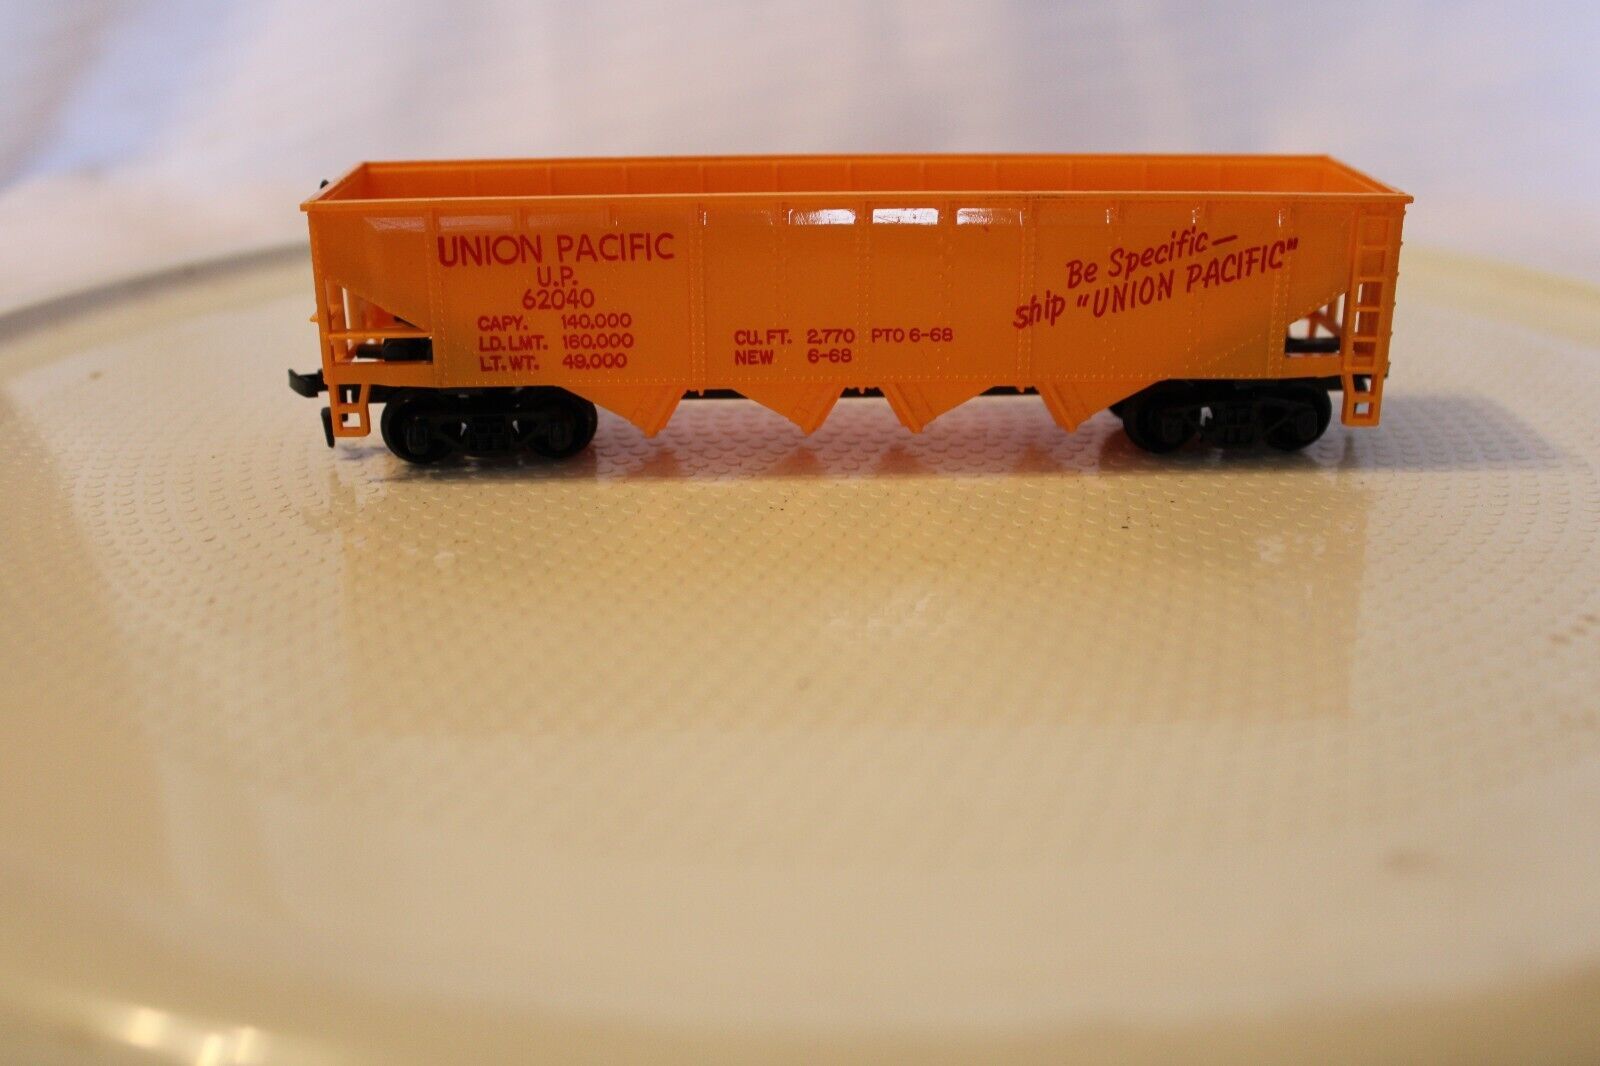 Primary image for HO Scale Tyco, 4 Bay Hopper, Union Pacific, Yellow, #62040, Built